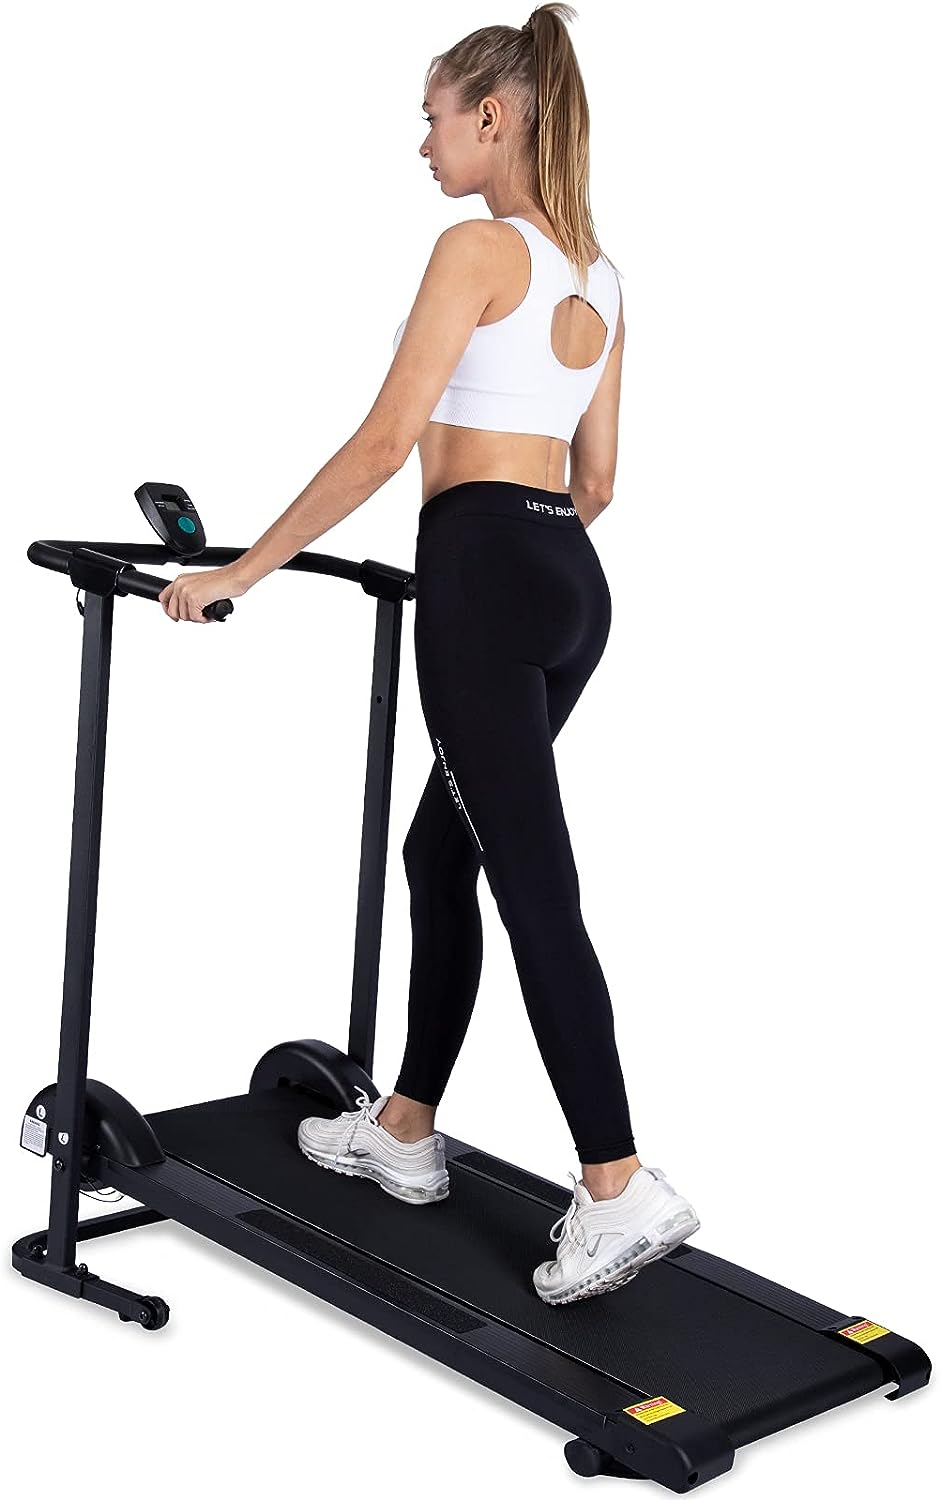 kotia Manual Treadmill Non Electric Treadmill with 10° Incline Small Foldable Treadmill for Apartment Home Walking Running (Mode GHN213)